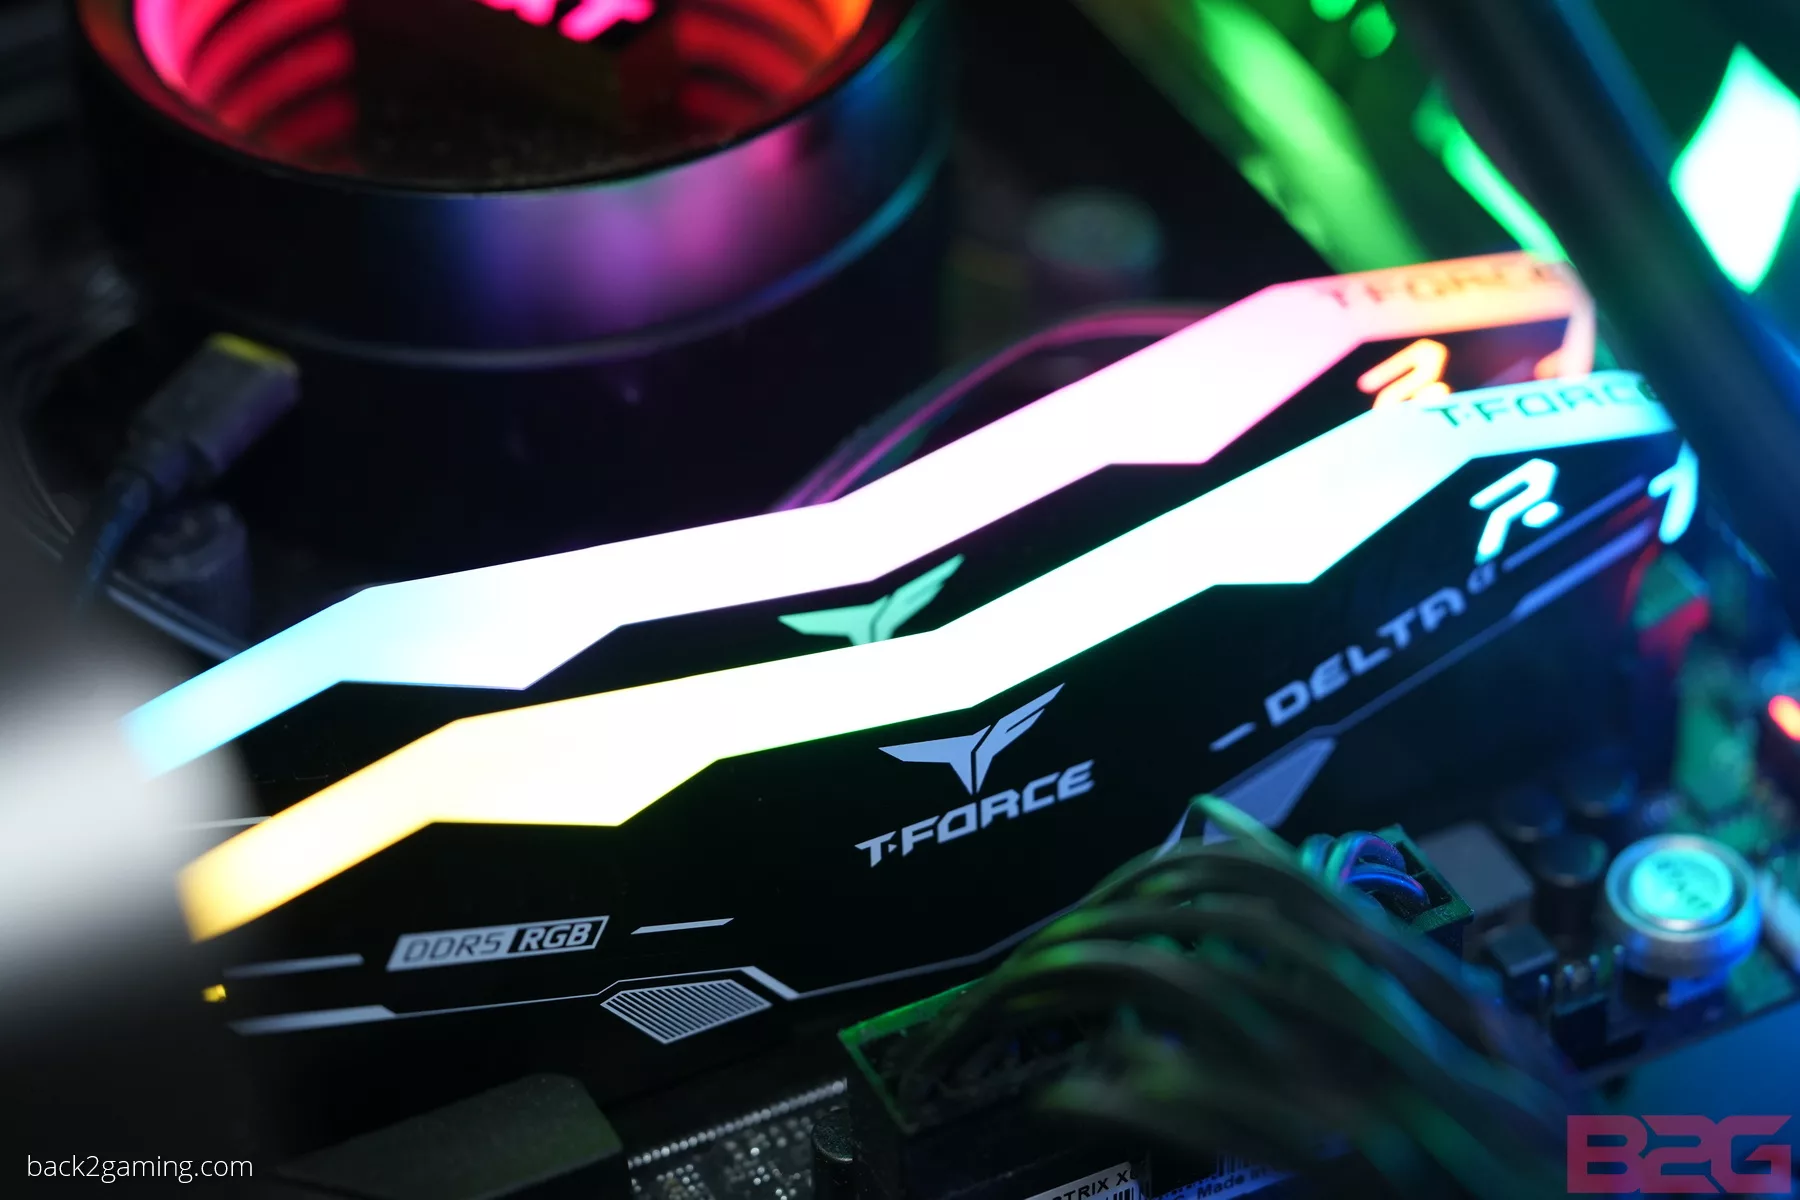 T-Force Deltaα Ddr5 Rgb Review. Image Courtesy Of Back2Gaming